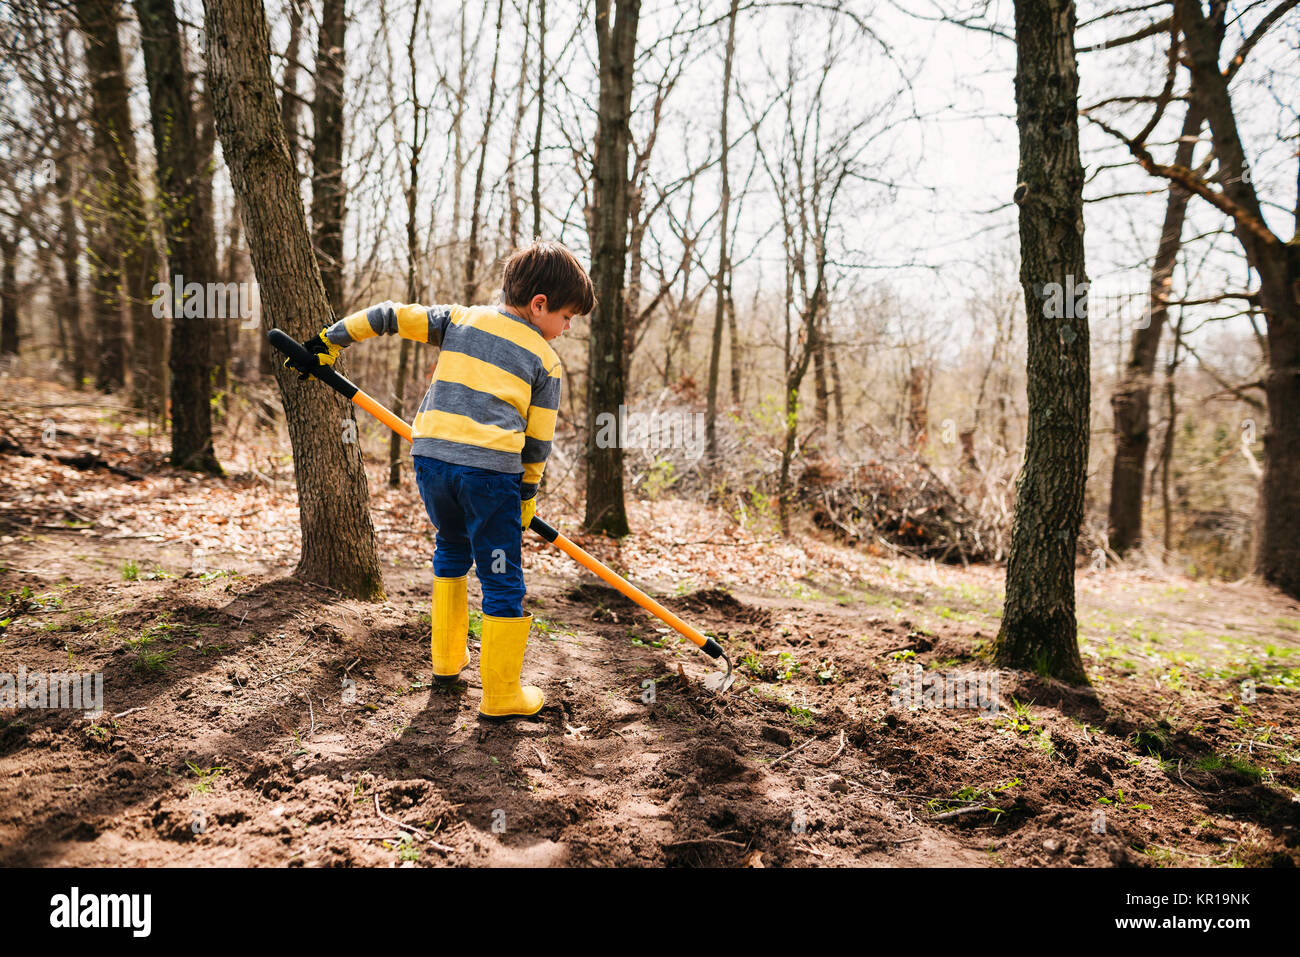 Boy in a garden digging soil with a hoe Stock Photo